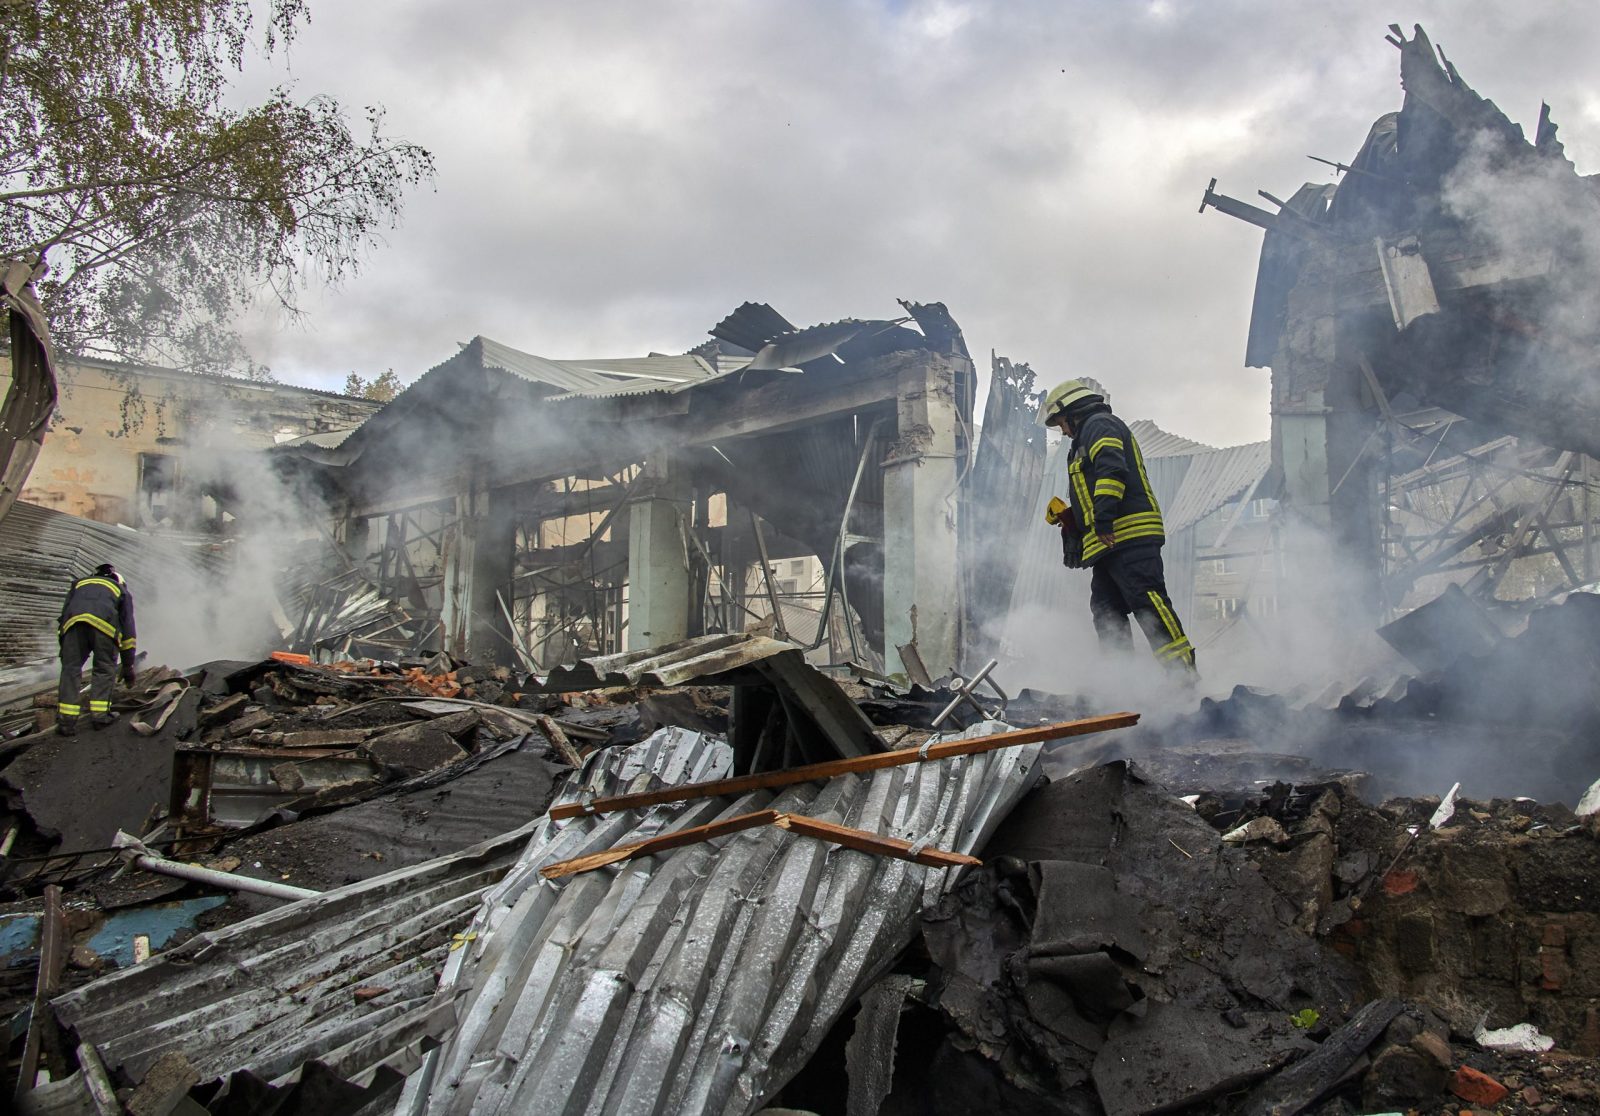 epa10222971 Ukrainian rescuers work to extinguish a fire in the rubble of a small factory damaged during shelling in Kharkiv, Ukraine, 04 October 2022 amid Russia's military invasion. According to Kharkiv Regional Prosecutor's office, the Russian military shelled Kharkiv from the territory of the Belgorod region of Russia presumably. The Ukrainian army pushed Russian troops from occupied territory in the northeast of the country in a counterattack. Kharkiv and surrounding areas have been the target of heavy shelling since February 2022, when Russian troops entered Ukraine starting a conflict that has provoked destruction and a humanitarian crisis.  EPA/SERGEY KOZLOV